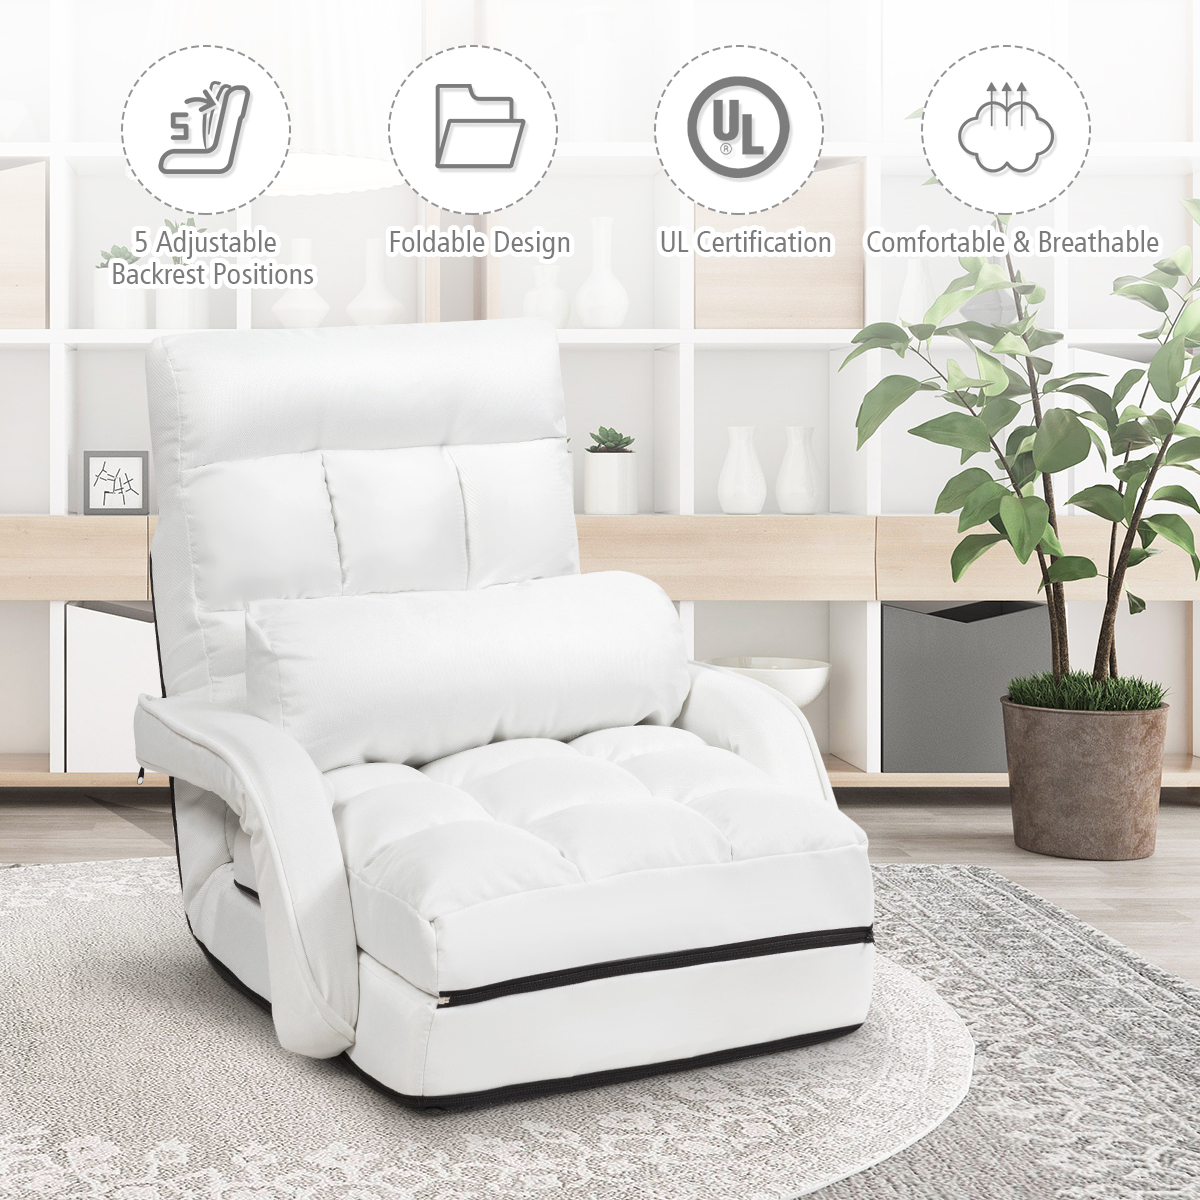 Costway Folding Floor Single Sofa Massage Recliner Chair W/ a Pillow 5 Adjustable Backrest Position Leisure Lounge Couch White - image 5 of 10